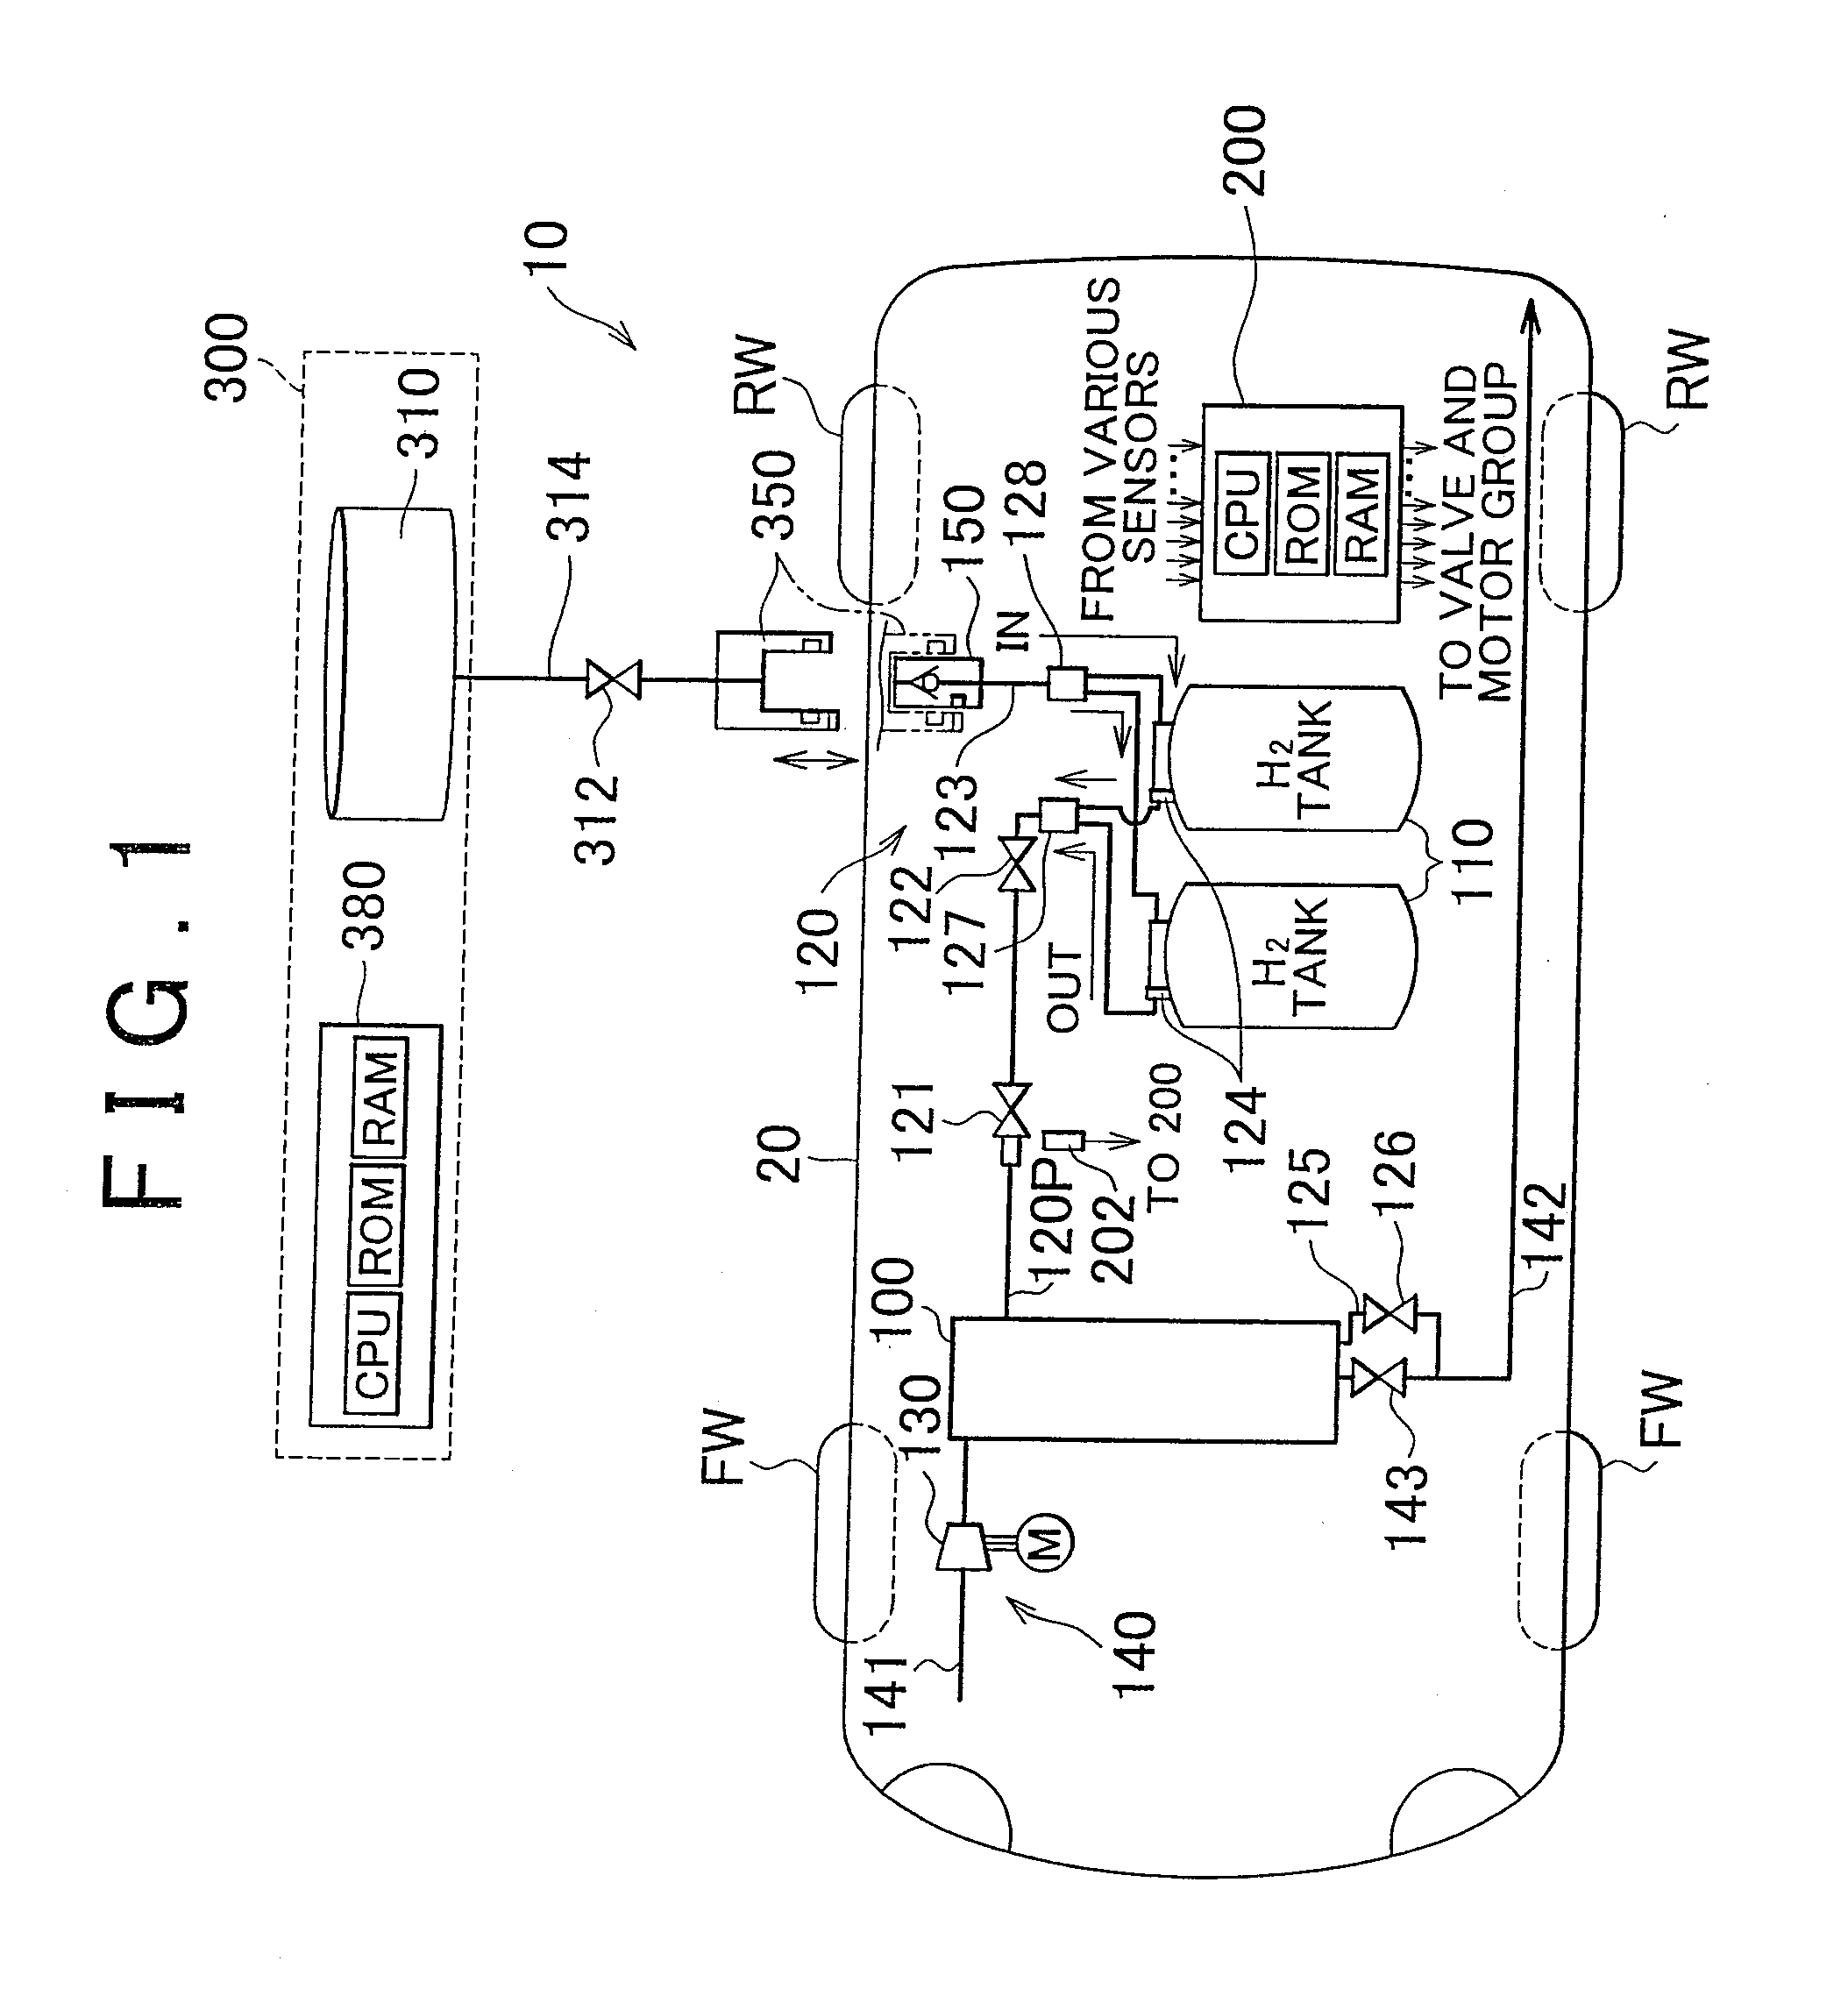 High pressure gas supply system and fuel cell system